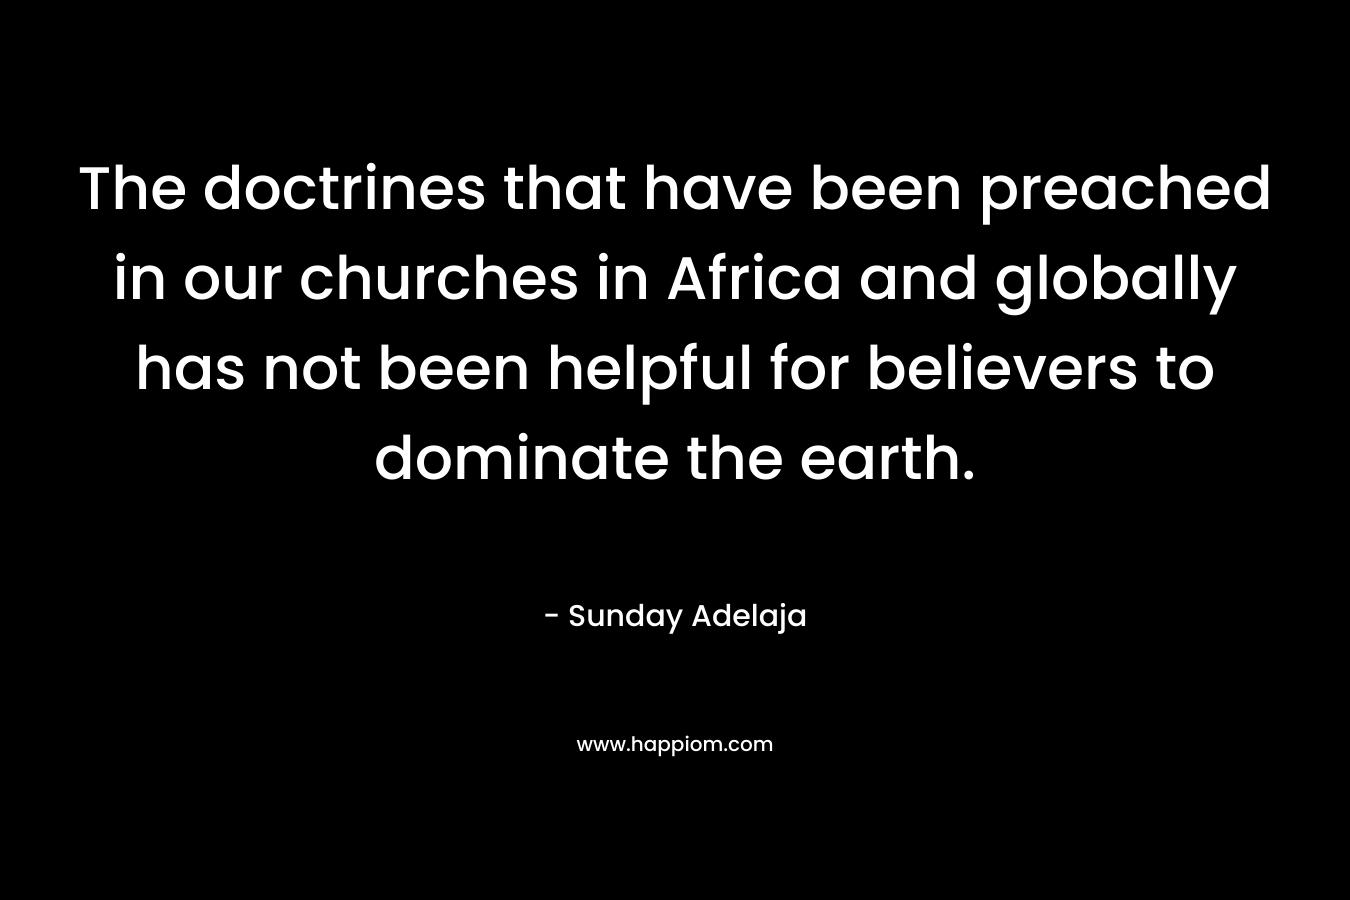 The doctrines that have been preached in our churches in Africa and globally has not been helpful for believers to dominate the earth.